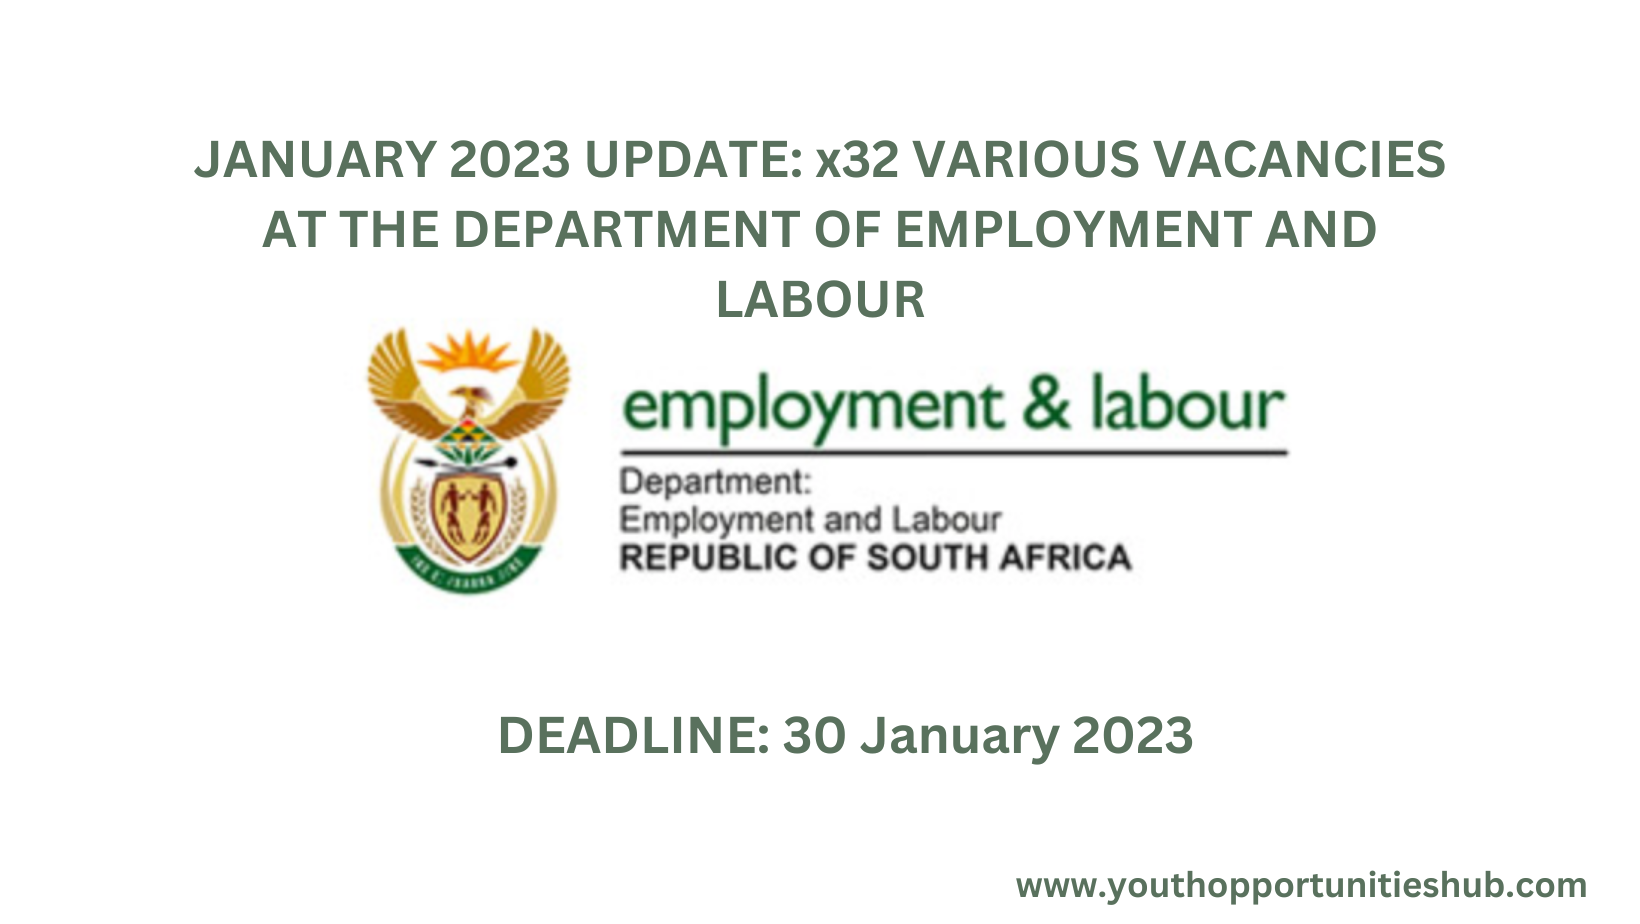 JANUARY 2023 UPDATE X32 VARIOUS VACANCIES AT THE DEPARTMENT OF EMPLOYMENT AND LABOUR 